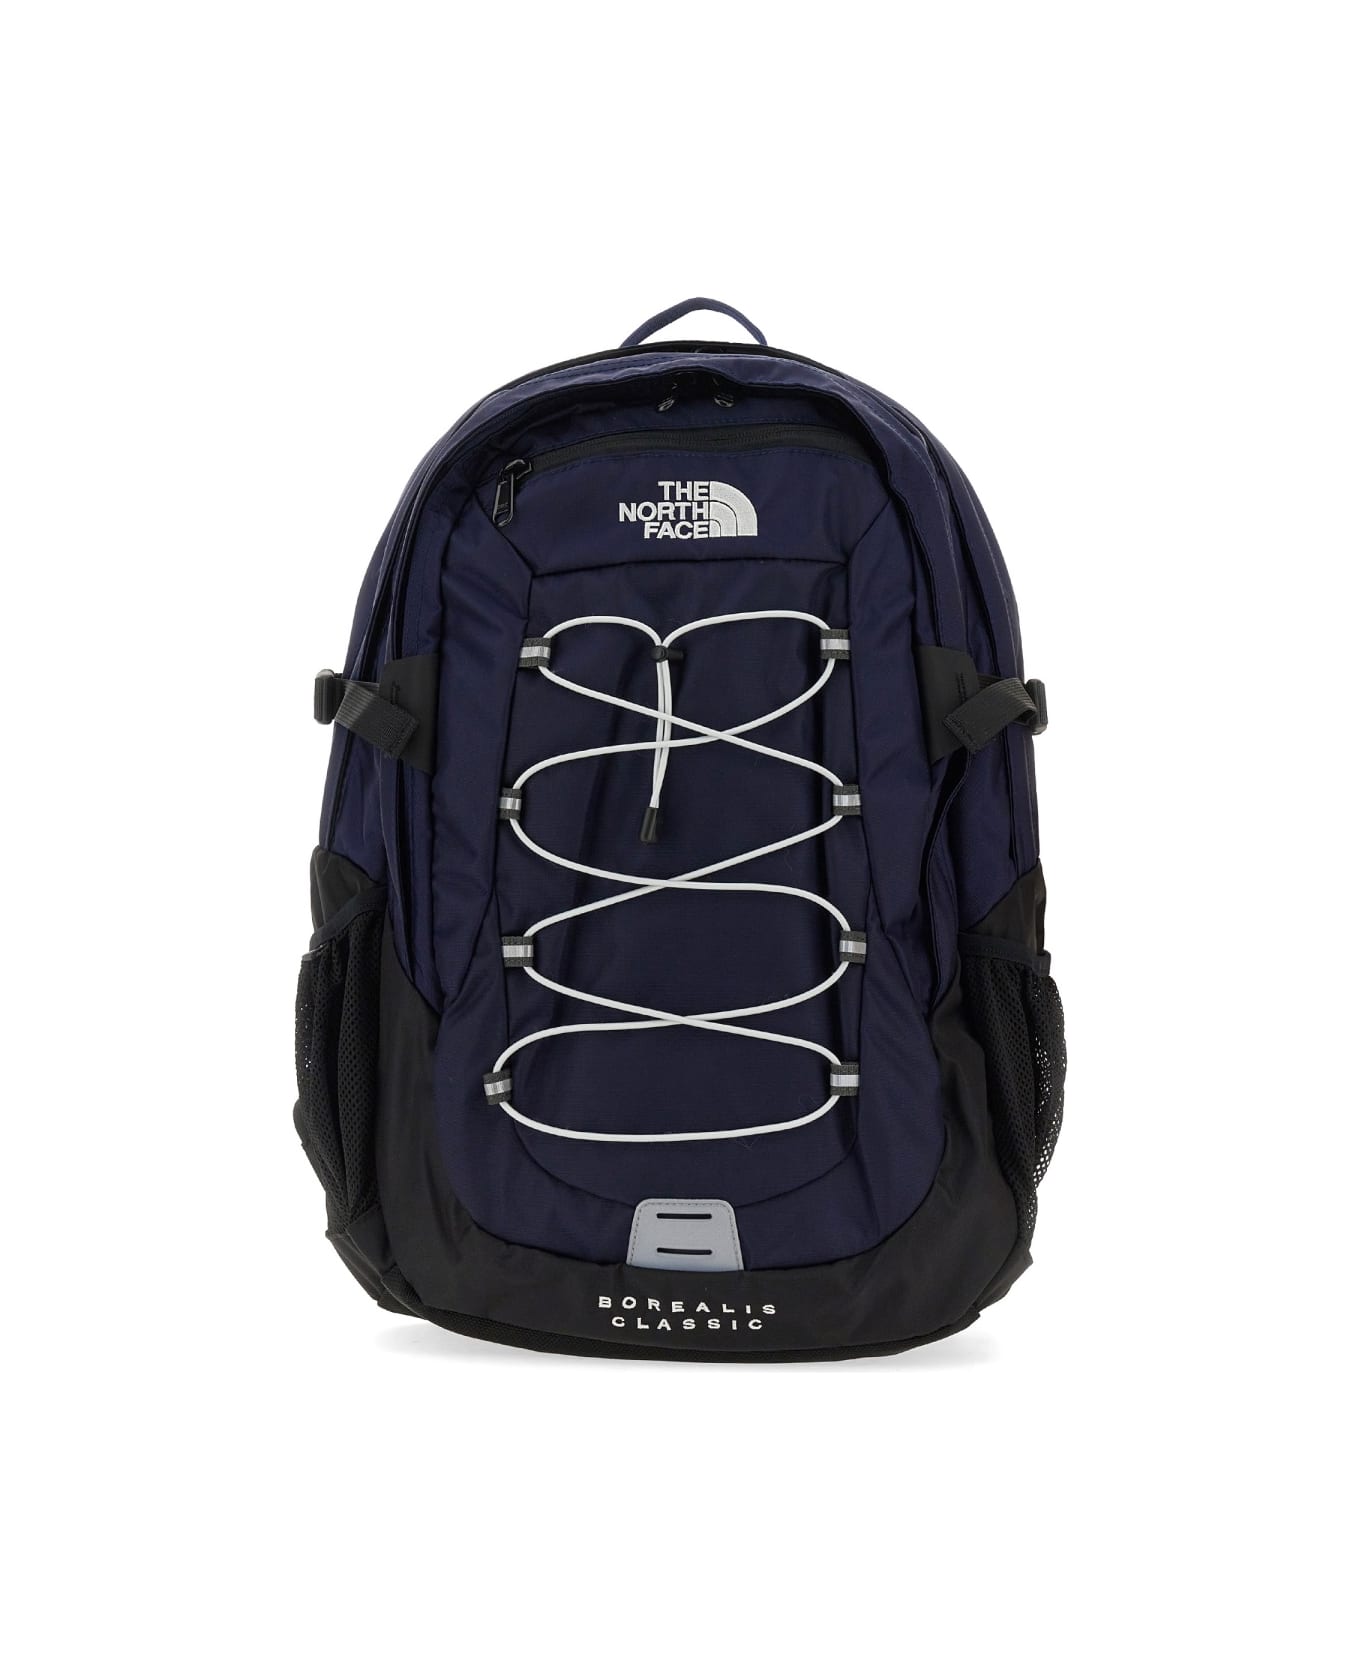 The North Face Borealis Classic Backpack - BLUE バックパック